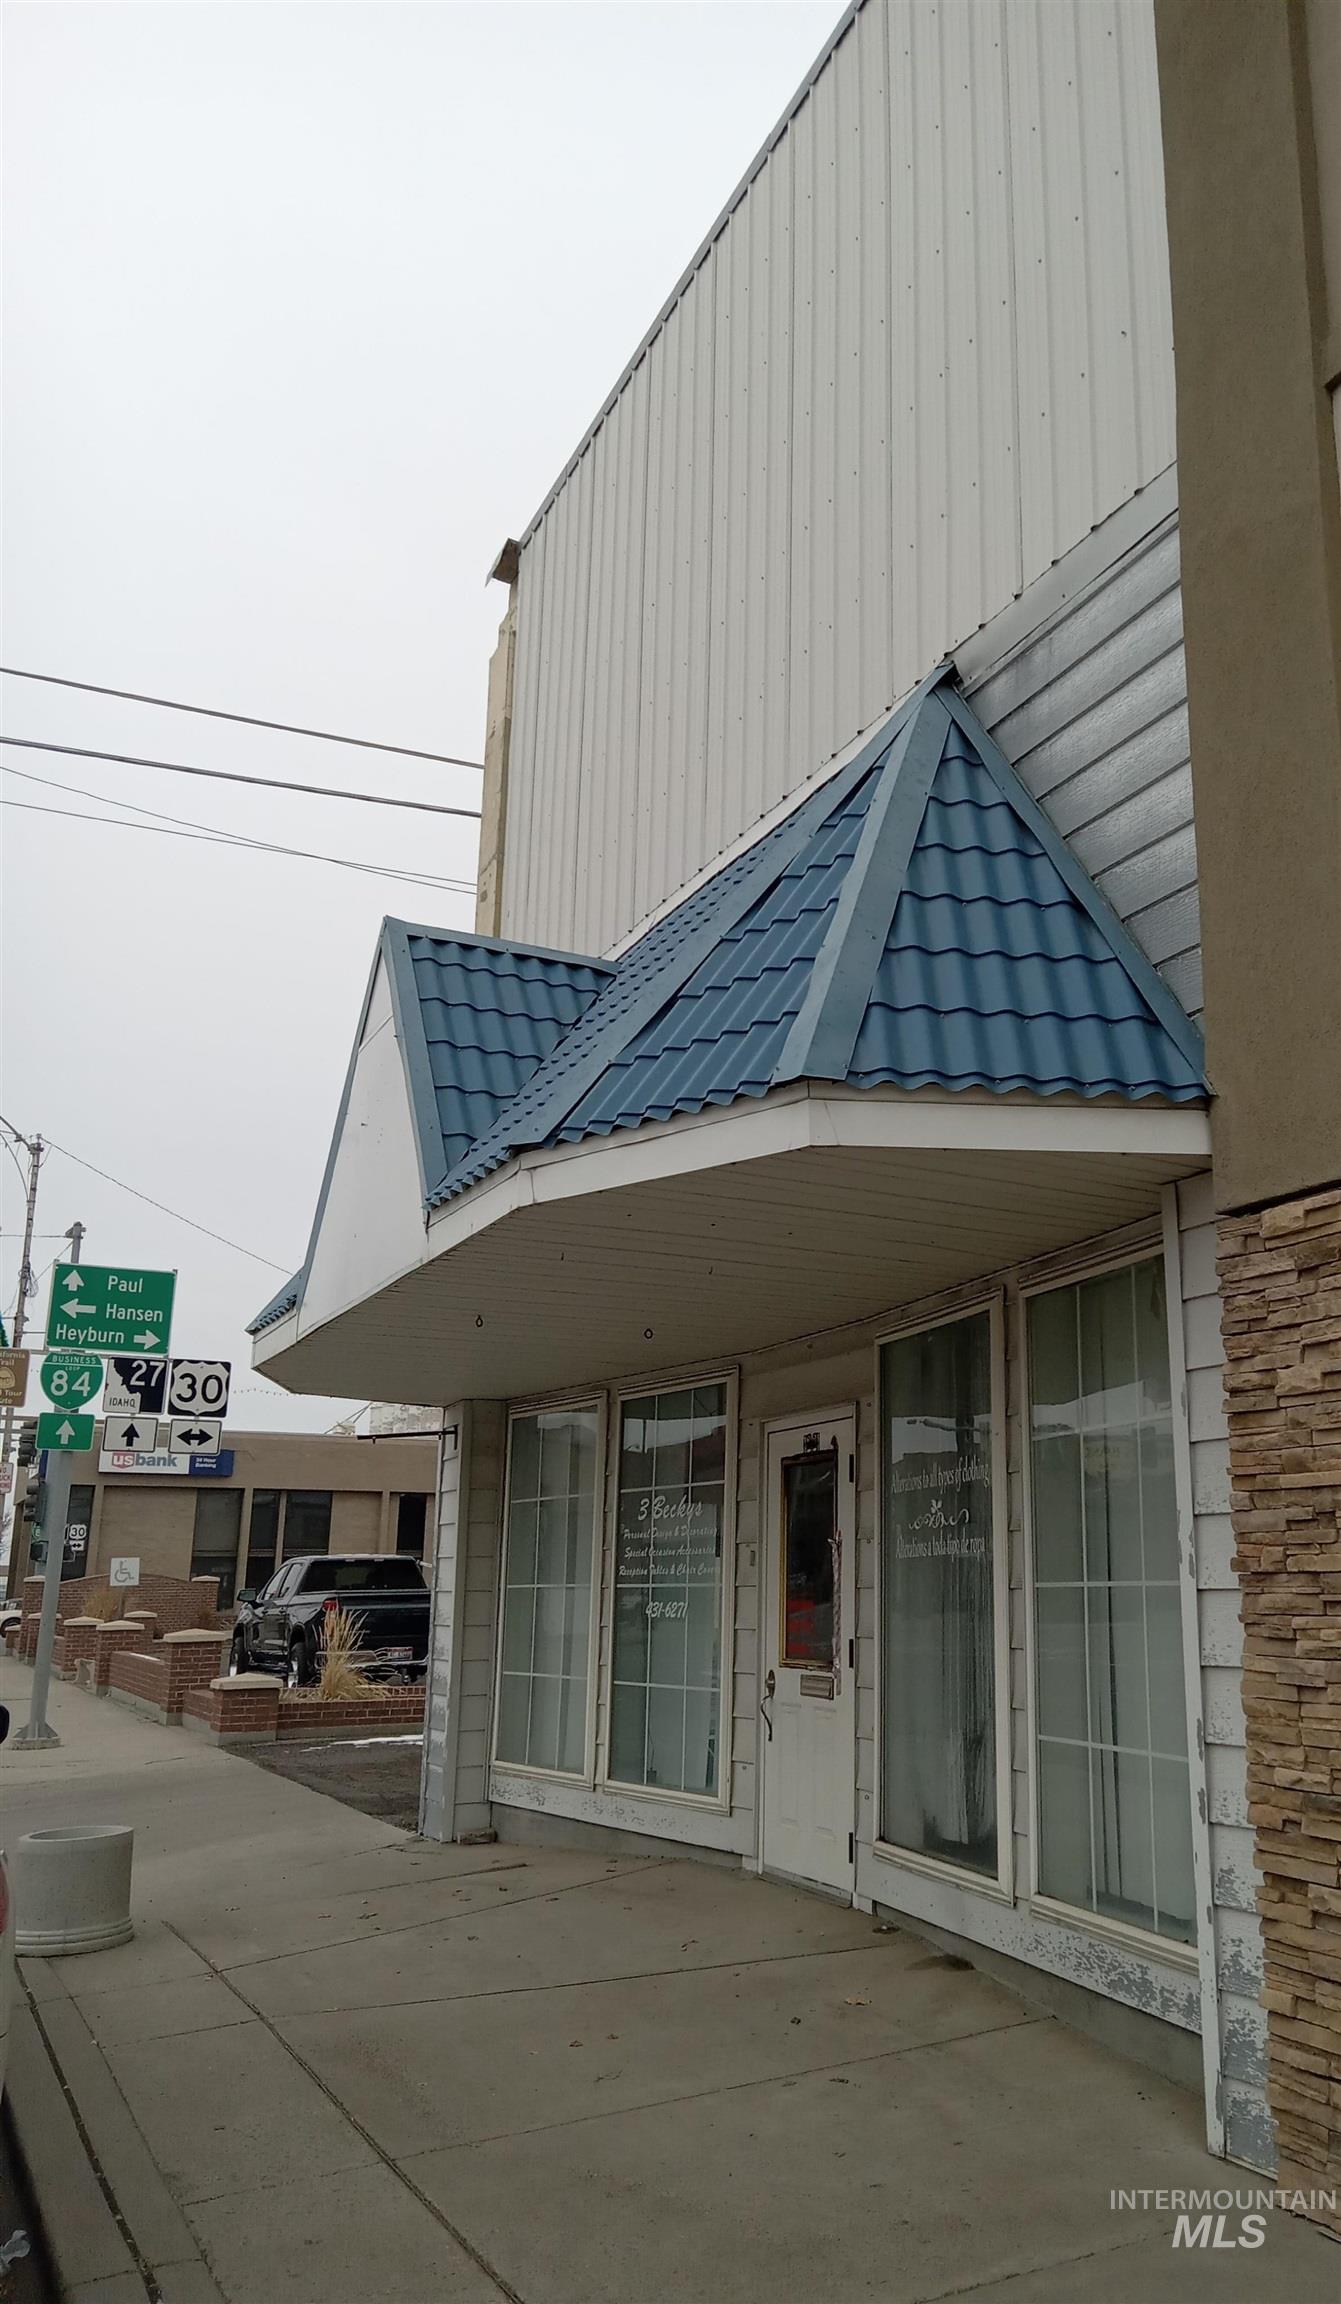 1221 Overland Ave, Burley, Idaho 83318, Business/Commercial For Sale, Price $750,000,MLS 98897663